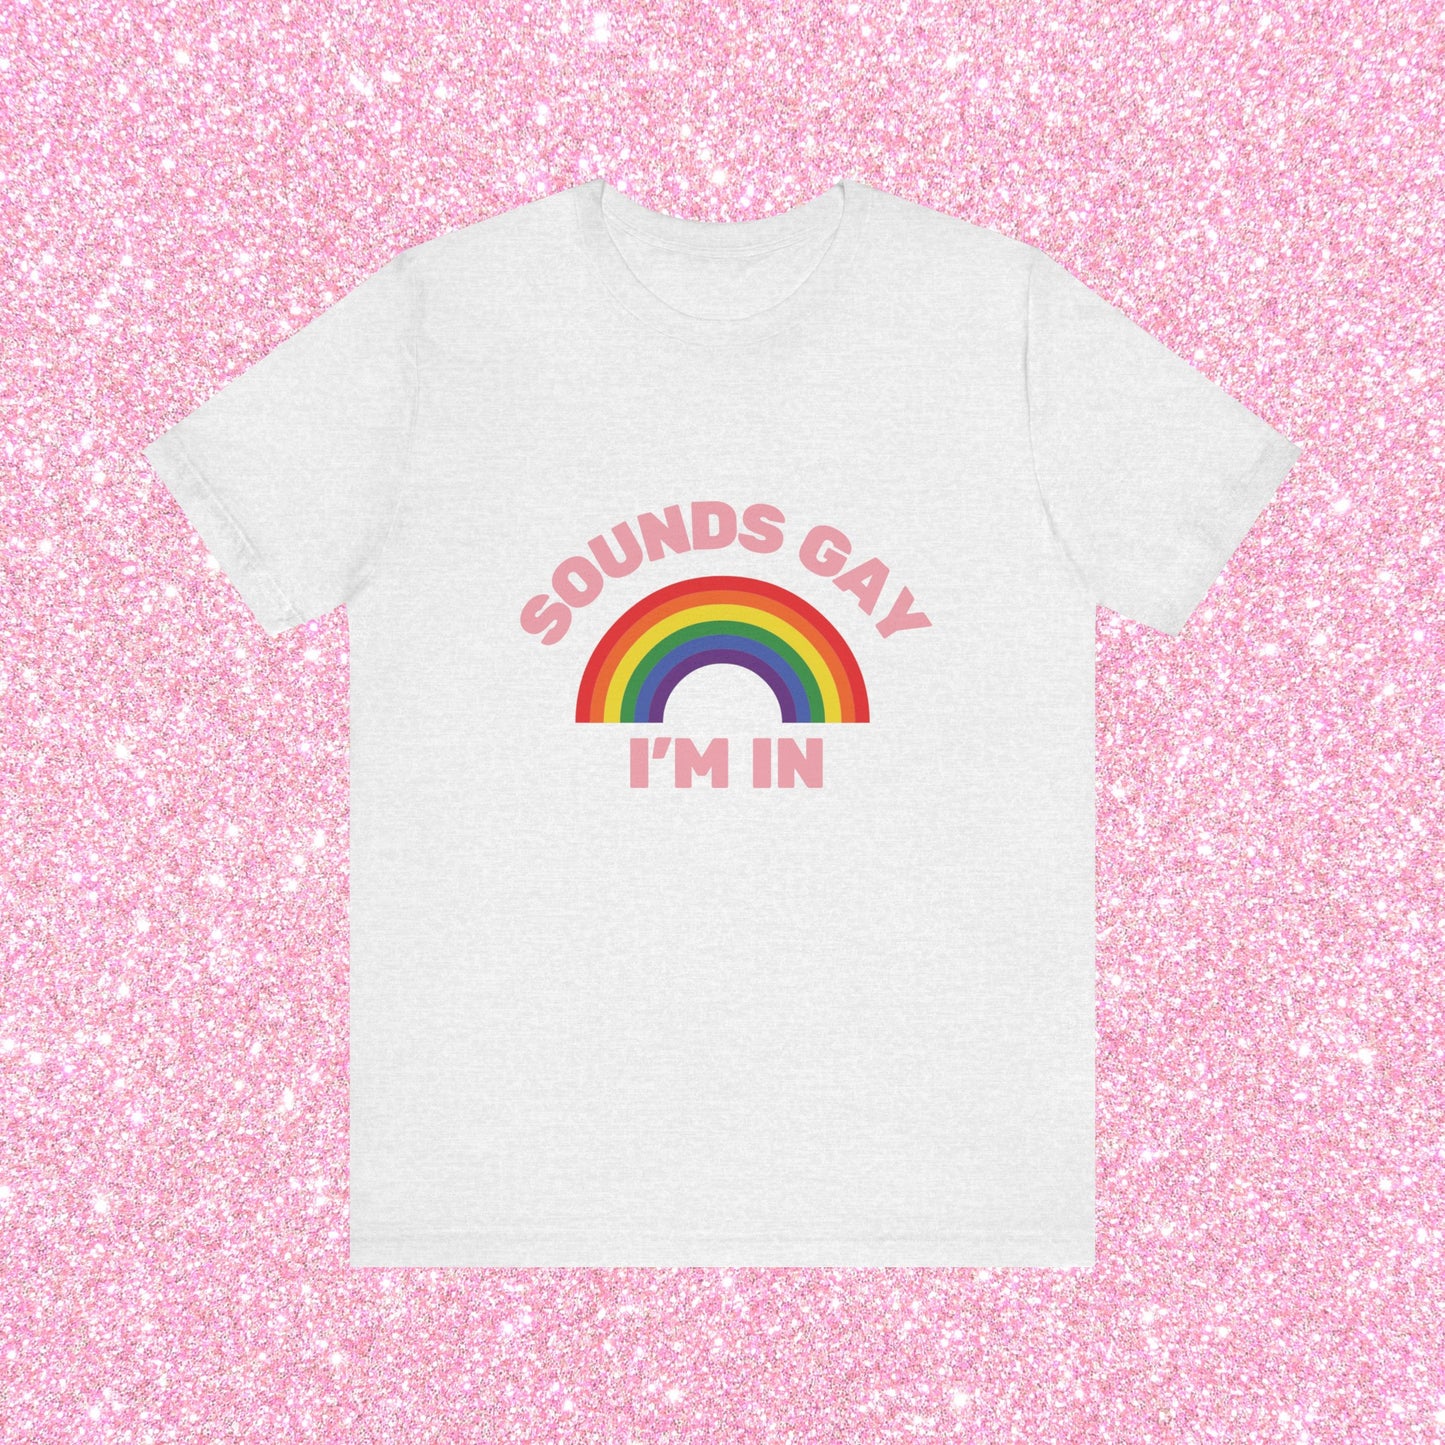 Sounds Gay I'm In, Soft Unisex T-Shirt